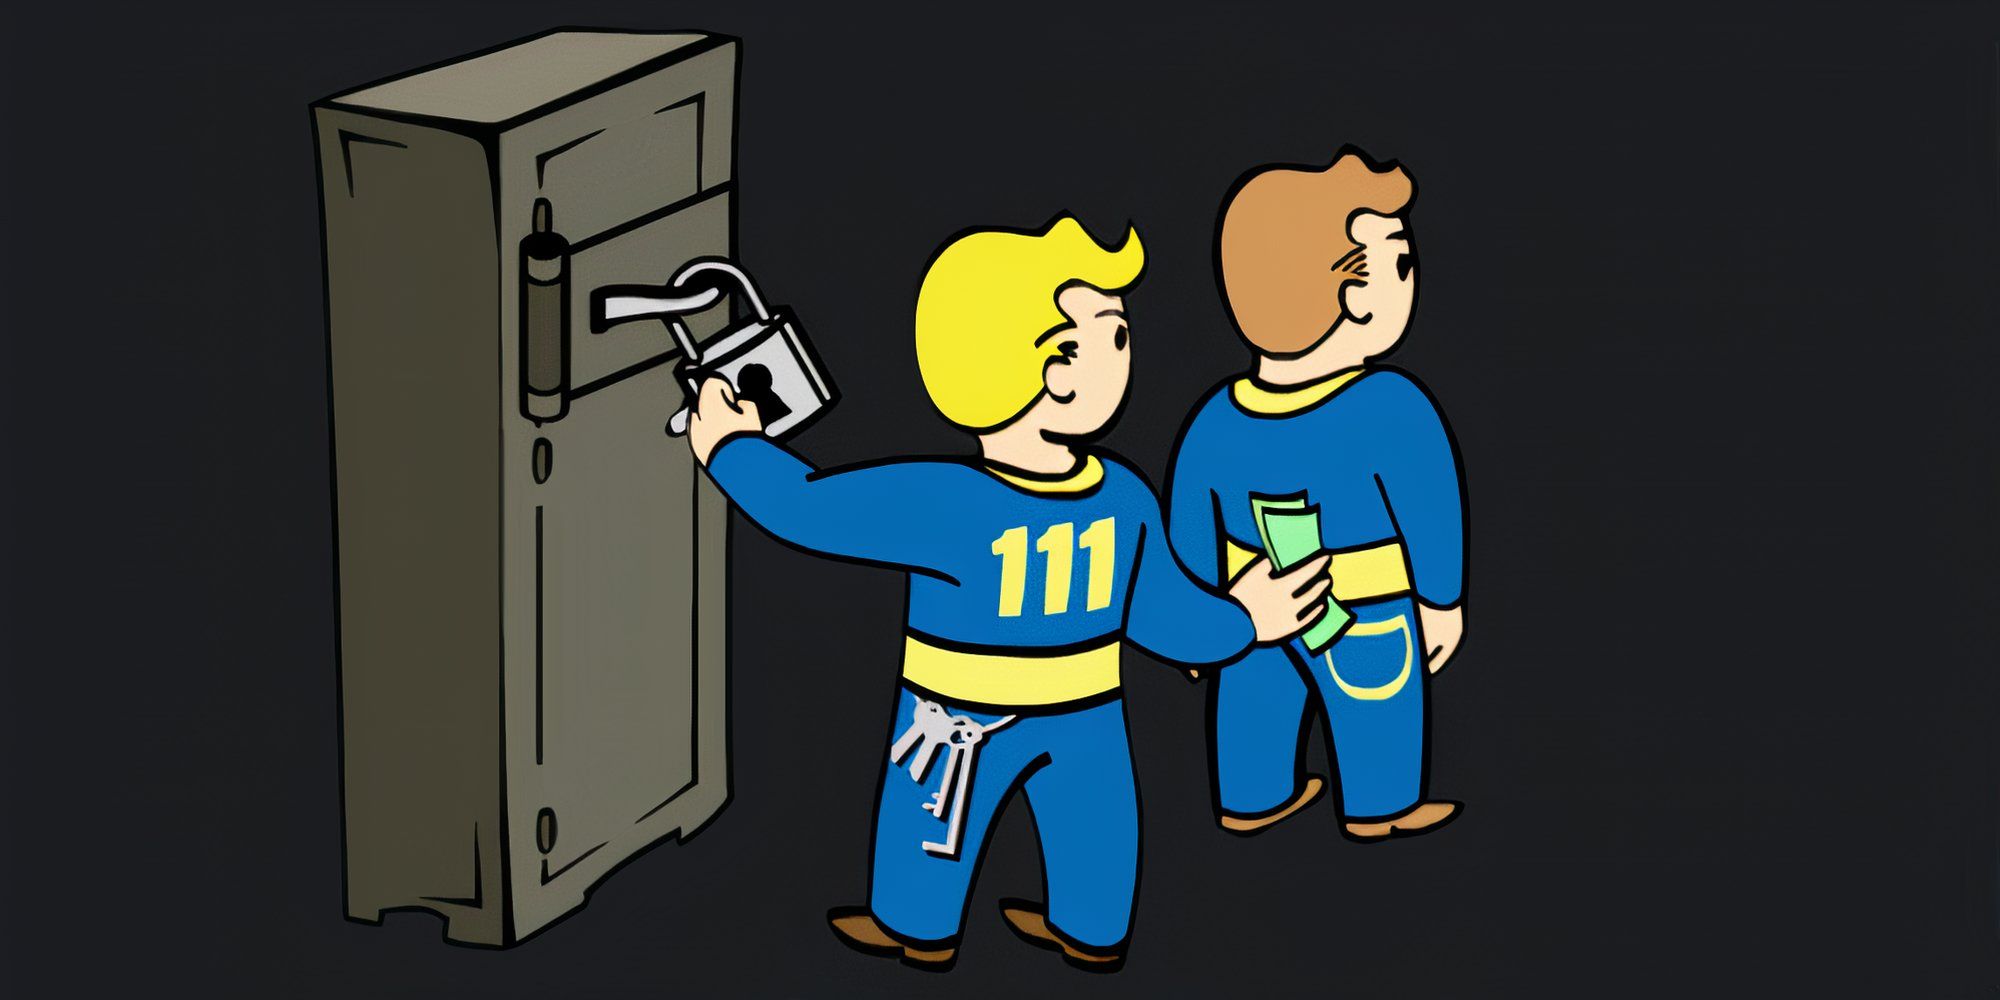 Vault Boy takes money from another person's back pocket